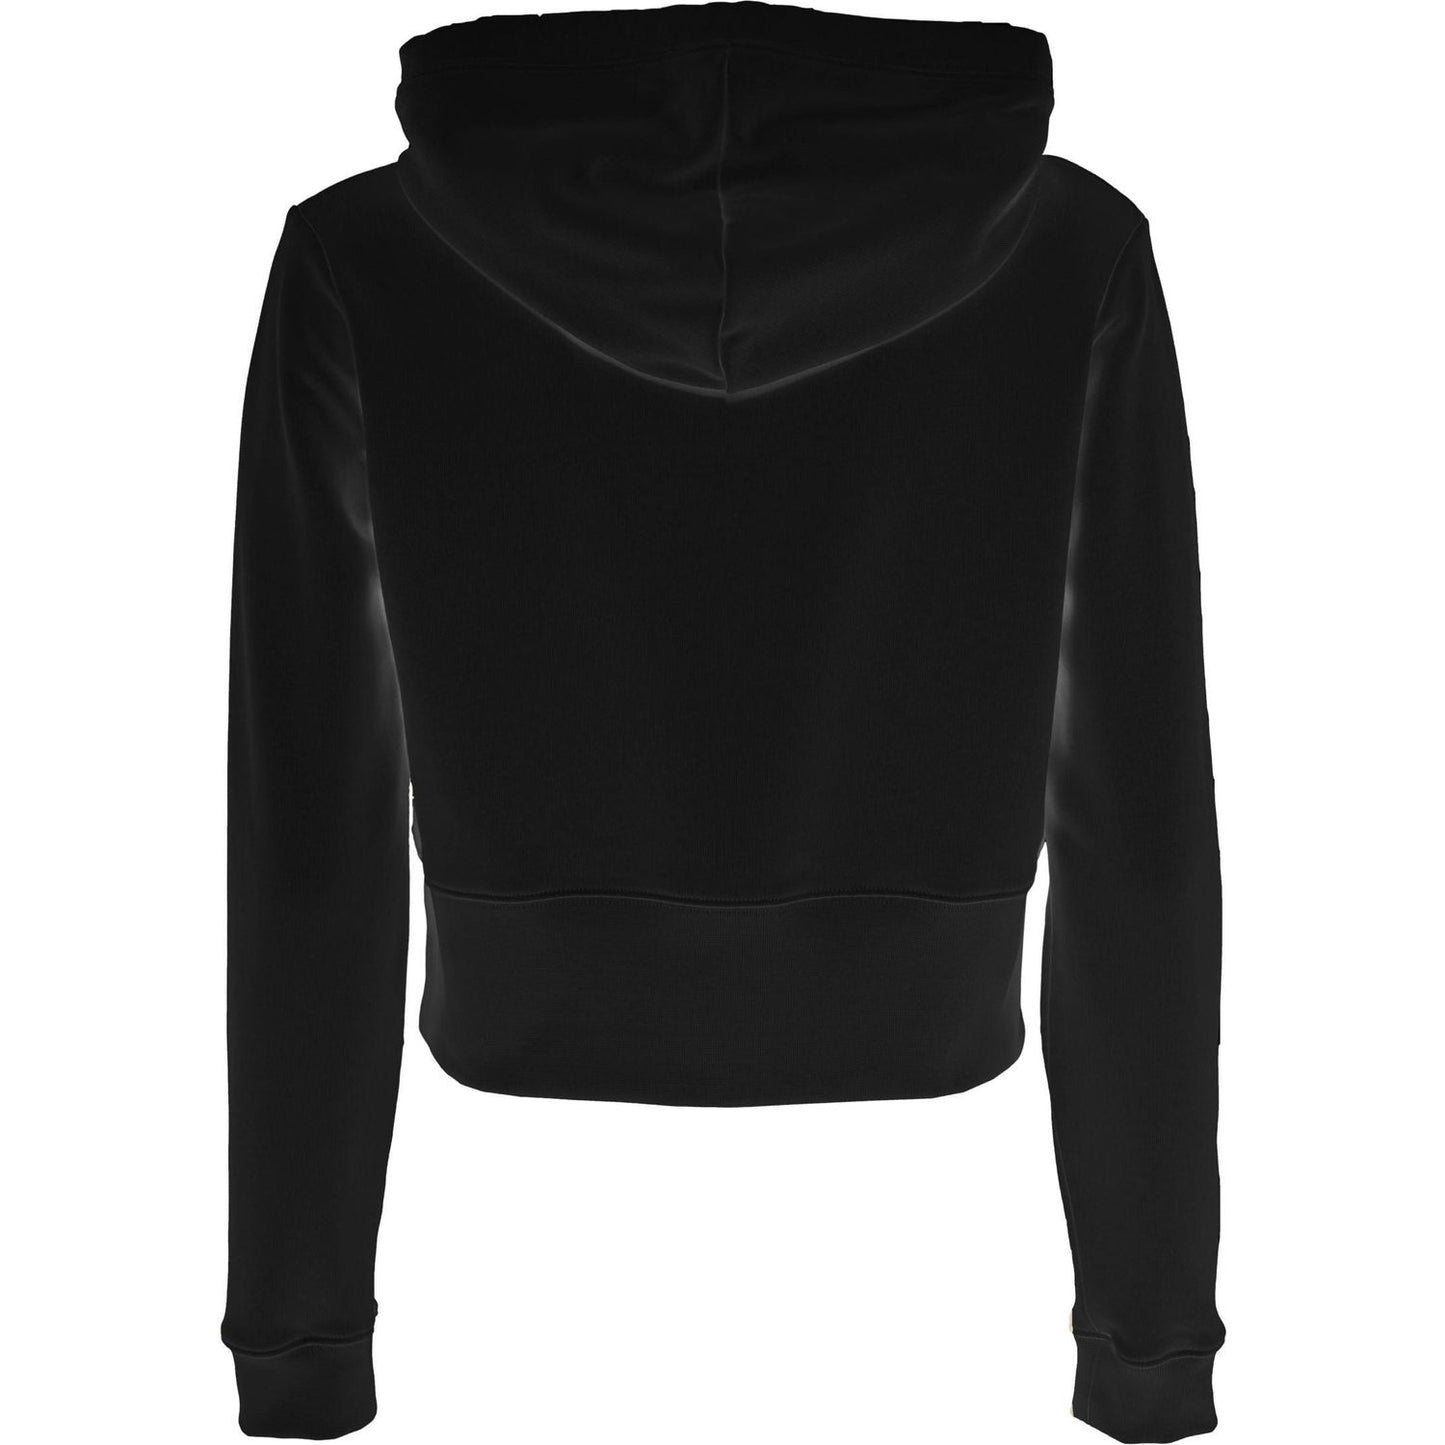 Imperfect Glitzy Logo Embellished Black Hoodie black-cotton-sweater-16 product-9071-1624538126-scaled-08584efd-d81.jpg